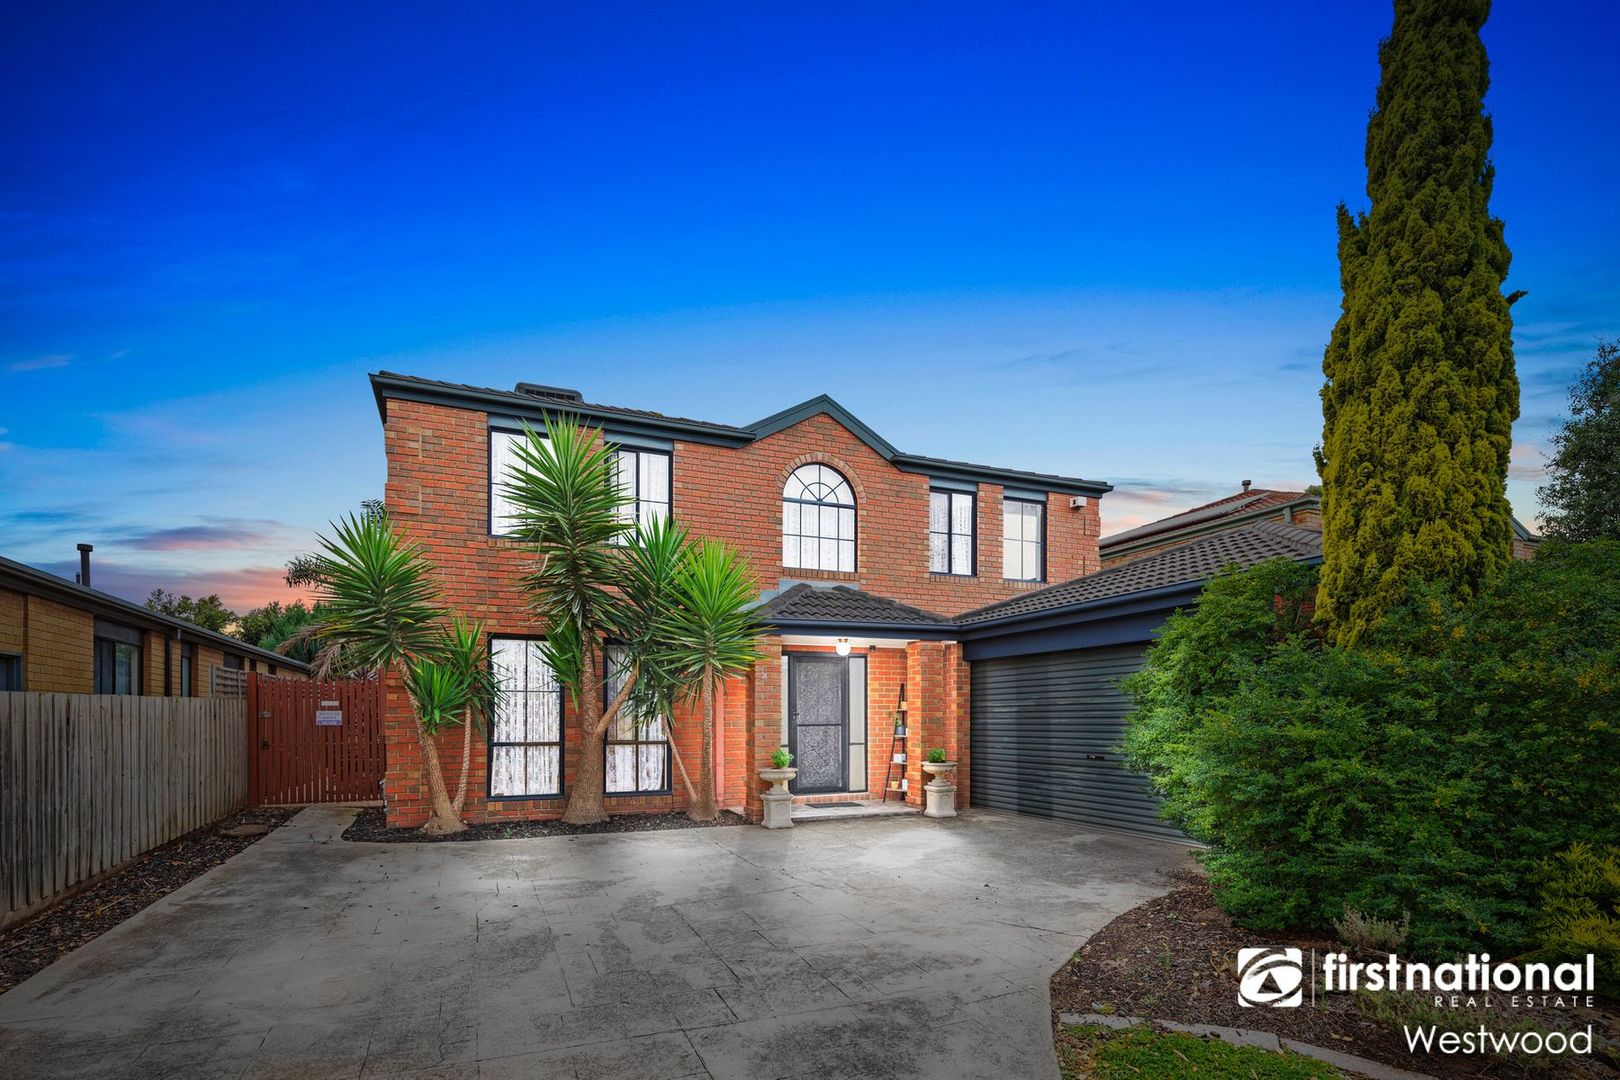 31 Kenmore Close, Hoppers Crossing VIC 3029